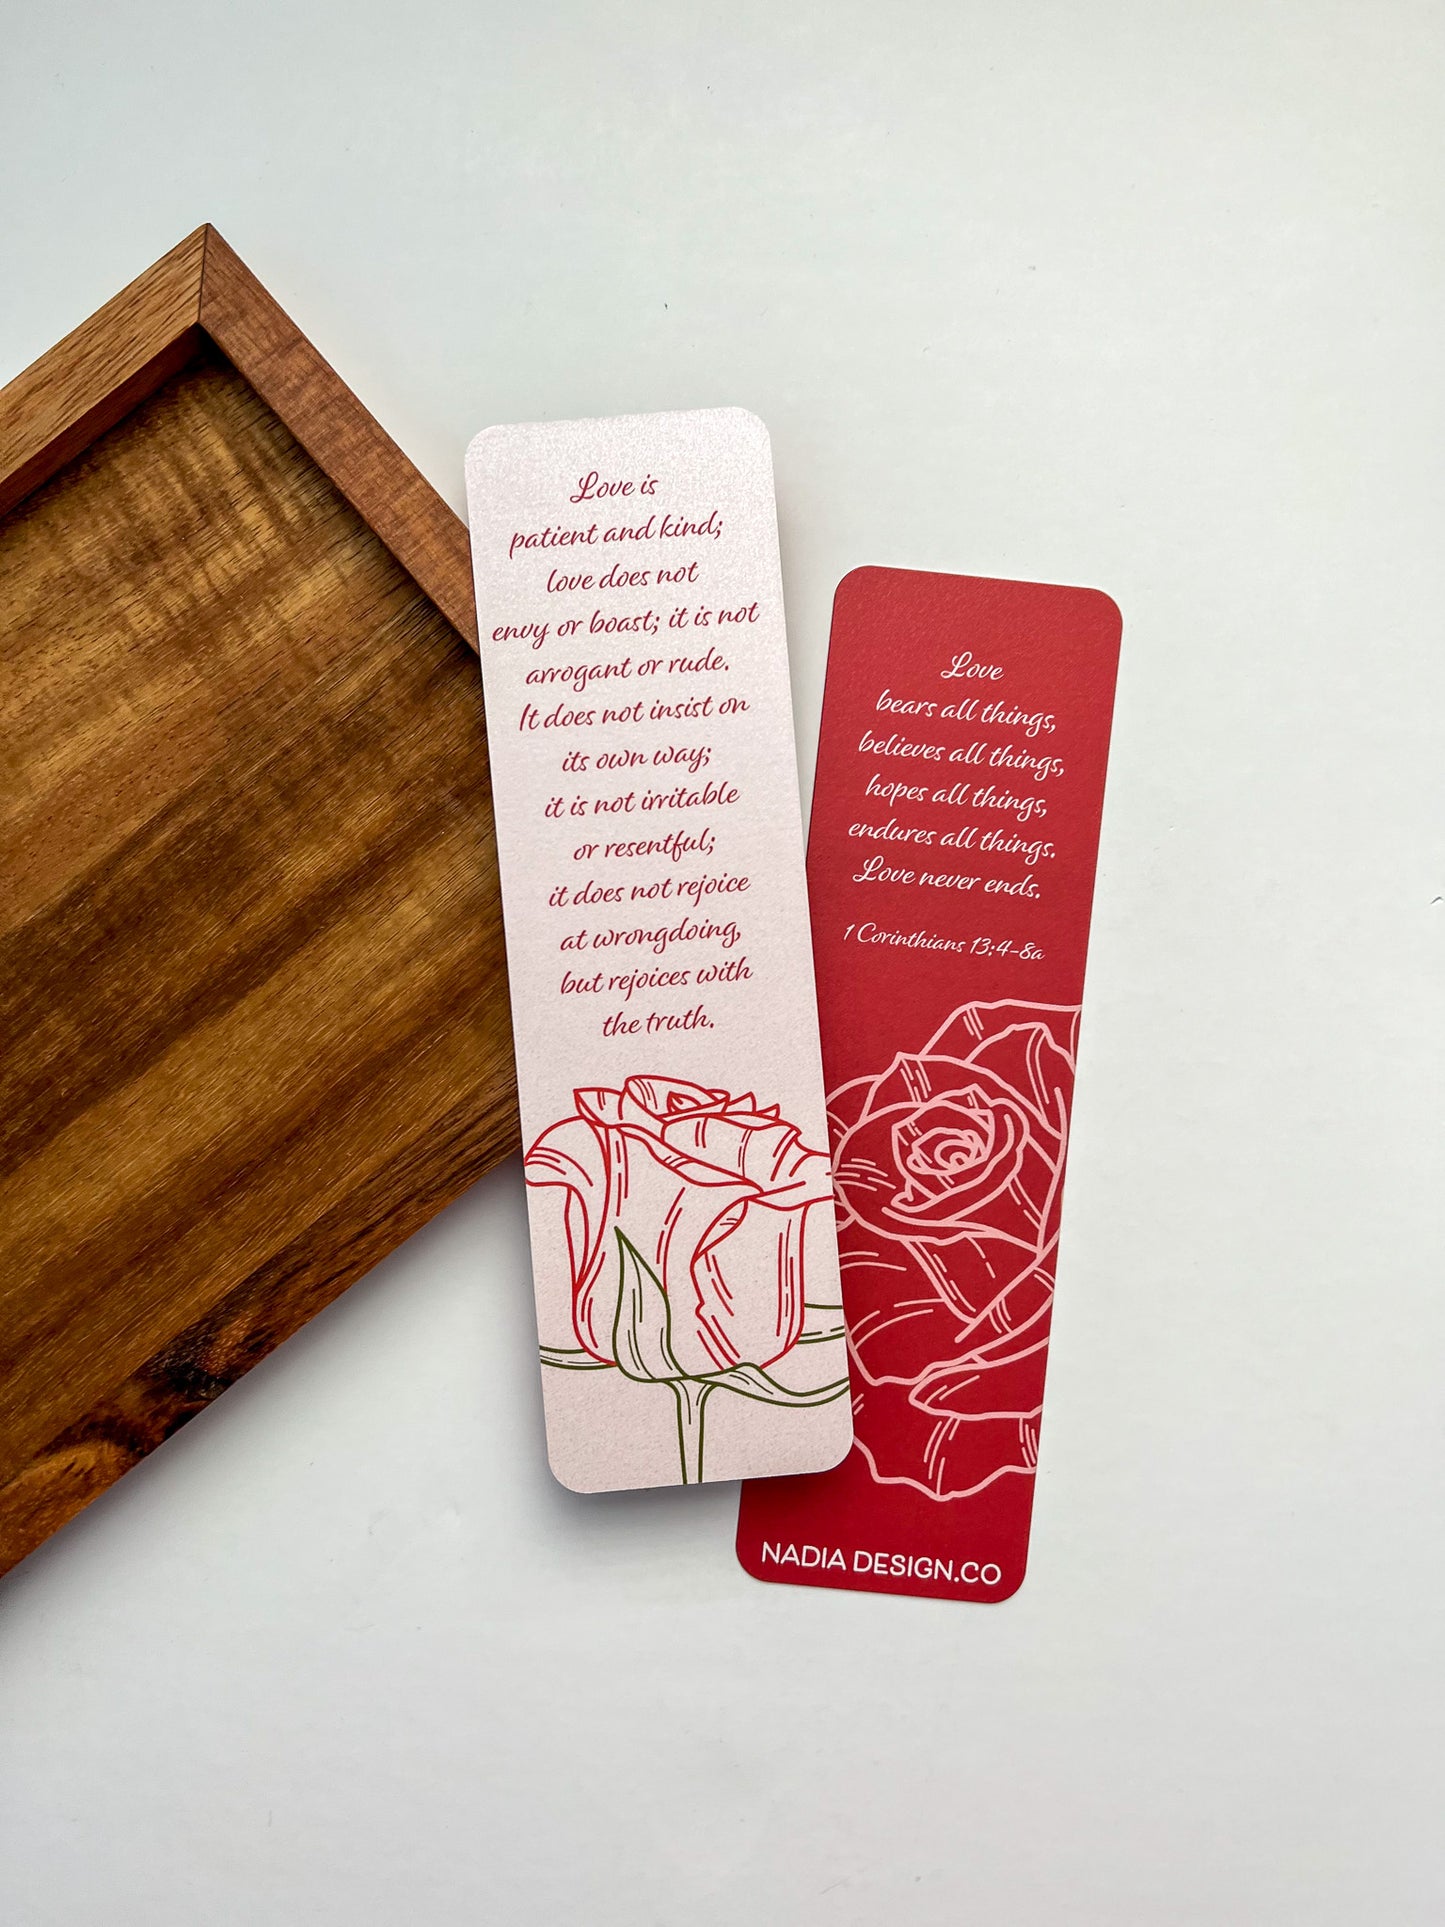 Floral Bible Verse Bookmarks - Pack of 3